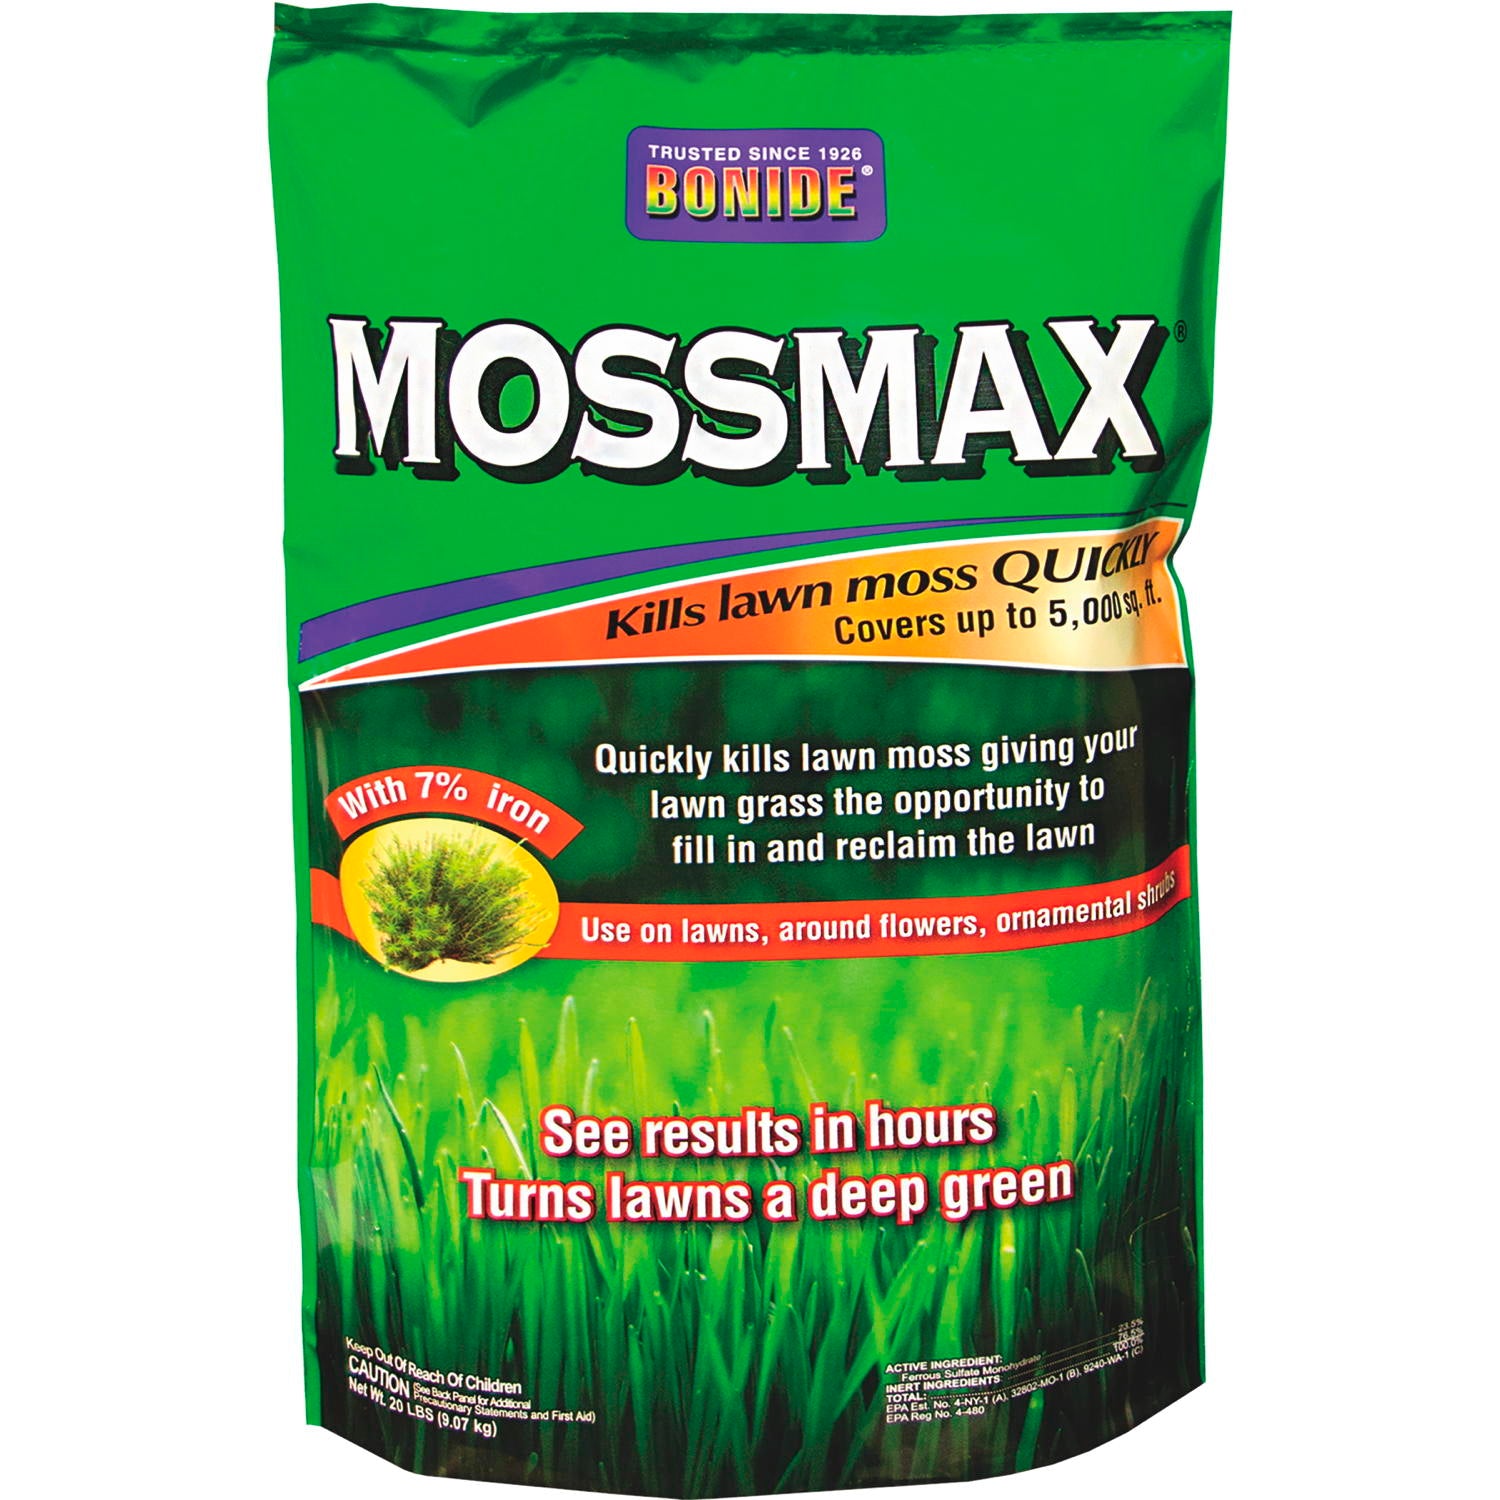 Granules that kill moss in lawns in just a few hours. Covers 5,000 square ft